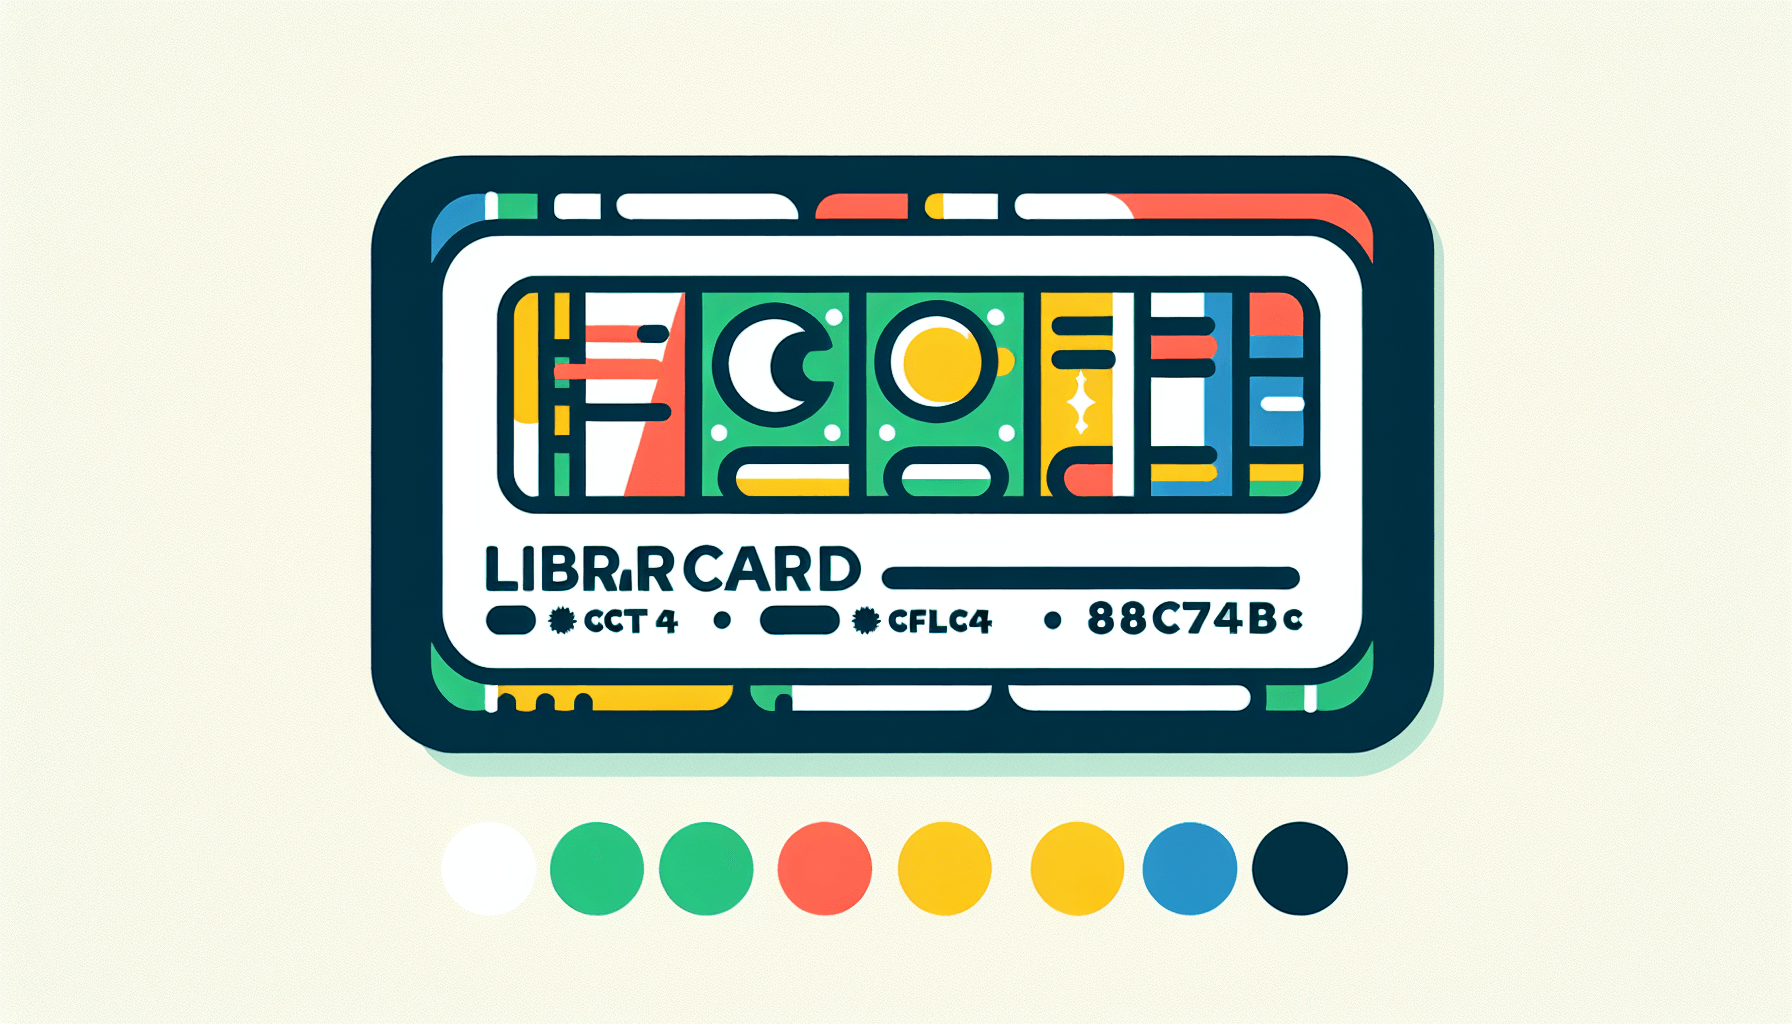 Library card in flat illustration style and white background, red #f47574, green #88c7a8, yellow #fcc44b, and blue #645bc8 colors.